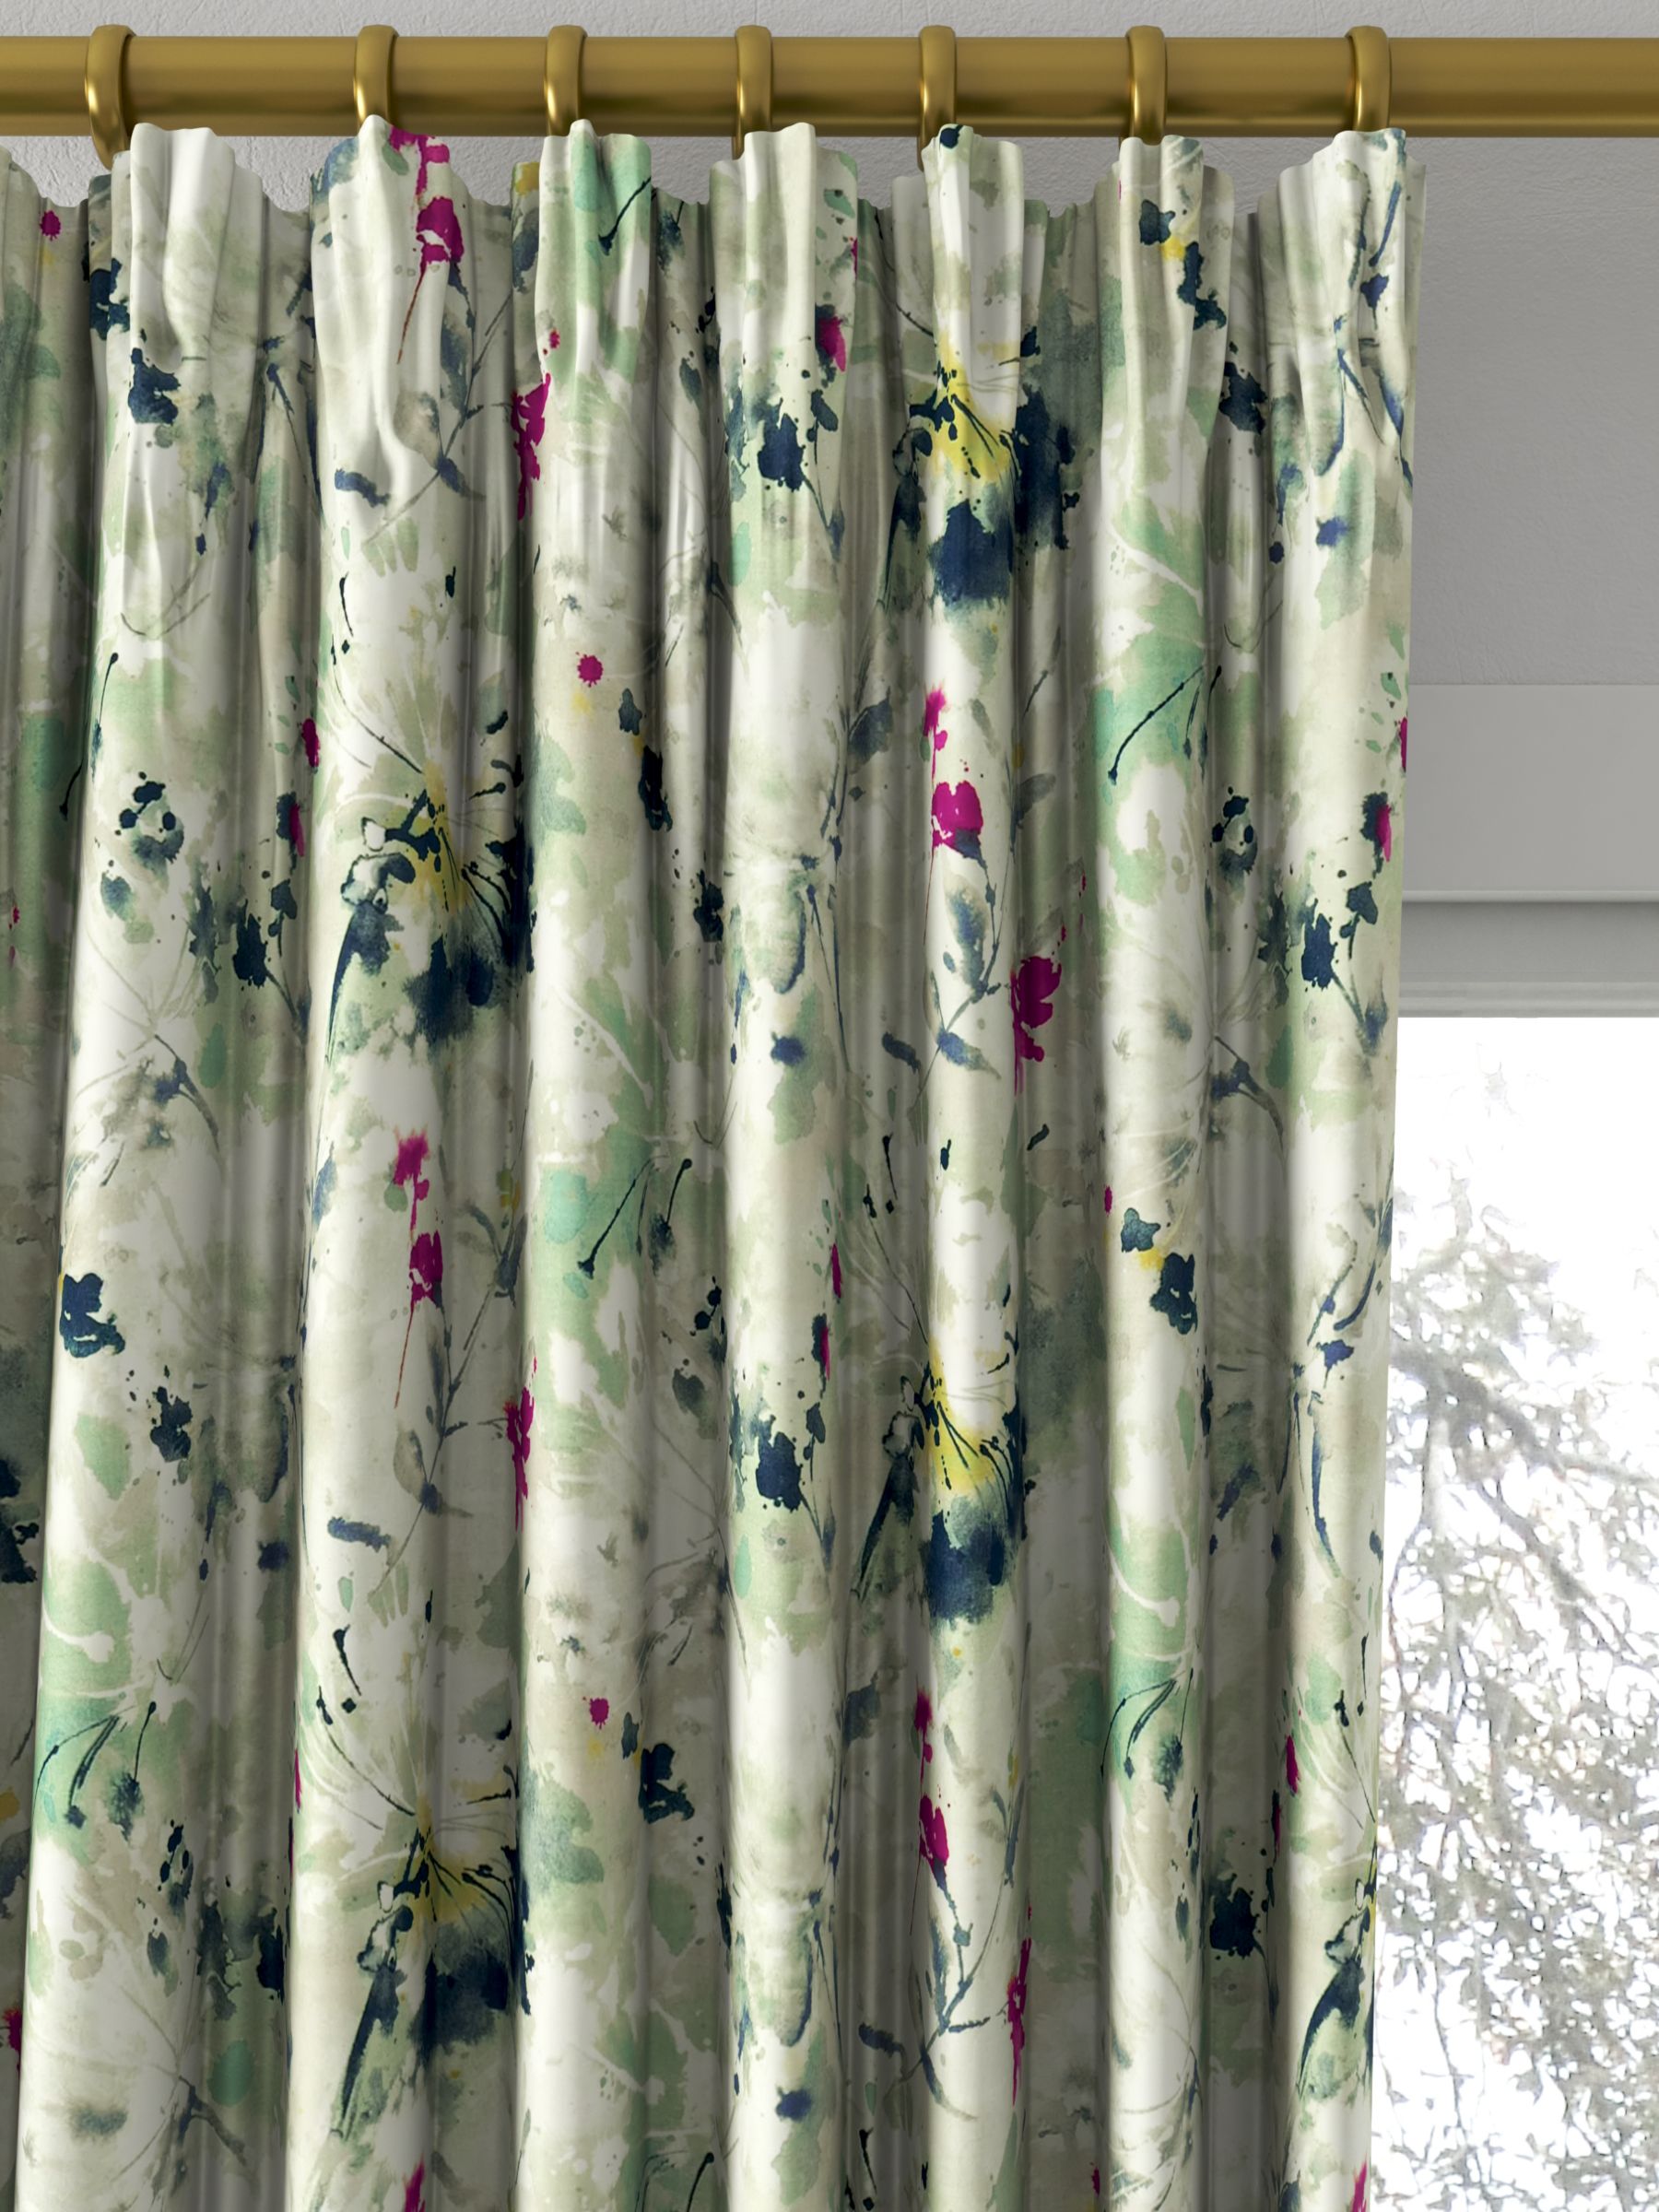 Sanderson Simi Made to Measure Curtains, Opal